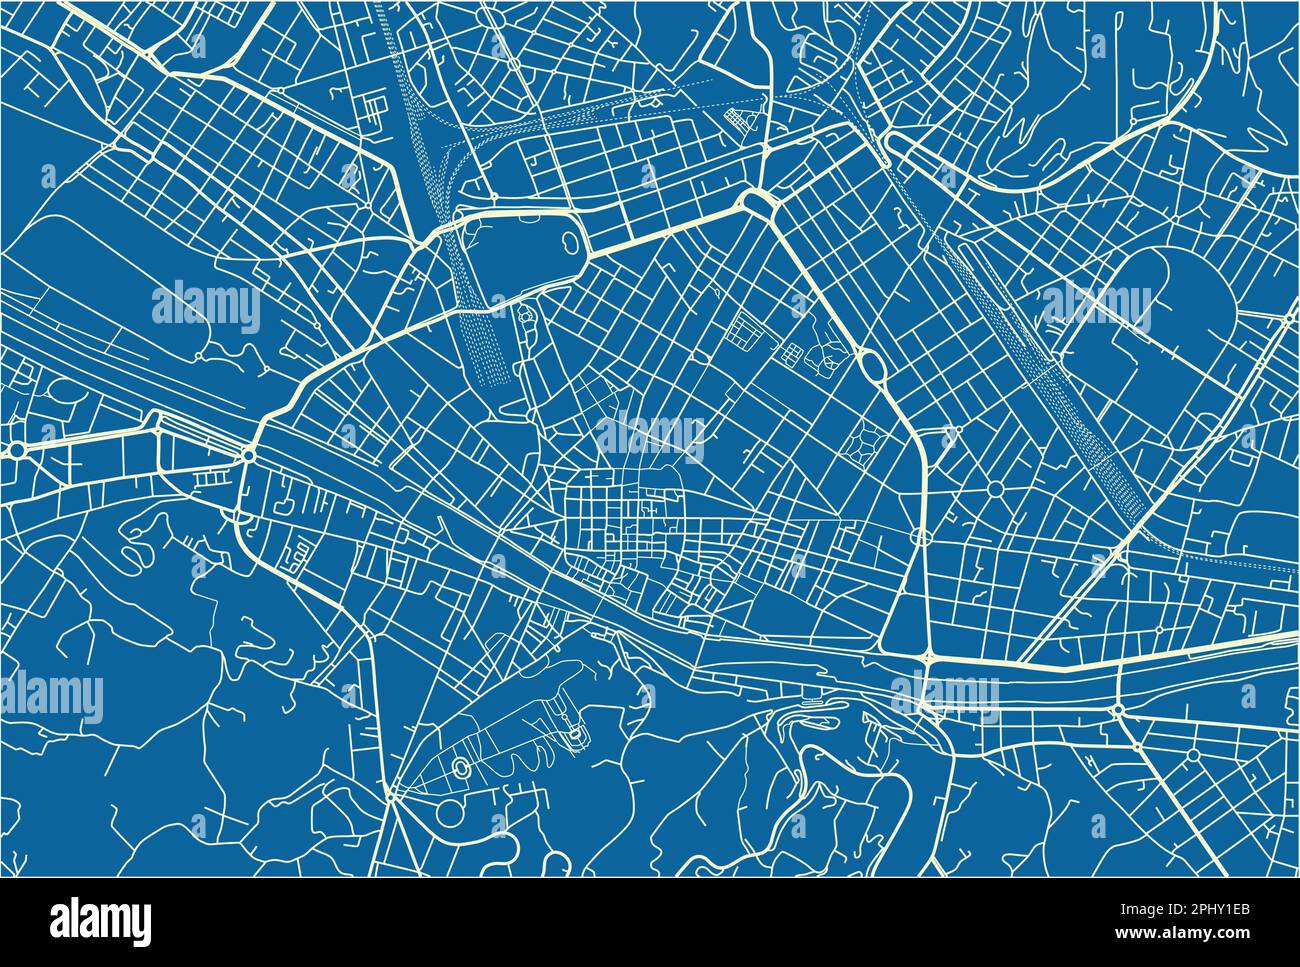 Blue and White vector city map of Florence with well organized separated layers. Stock Vector